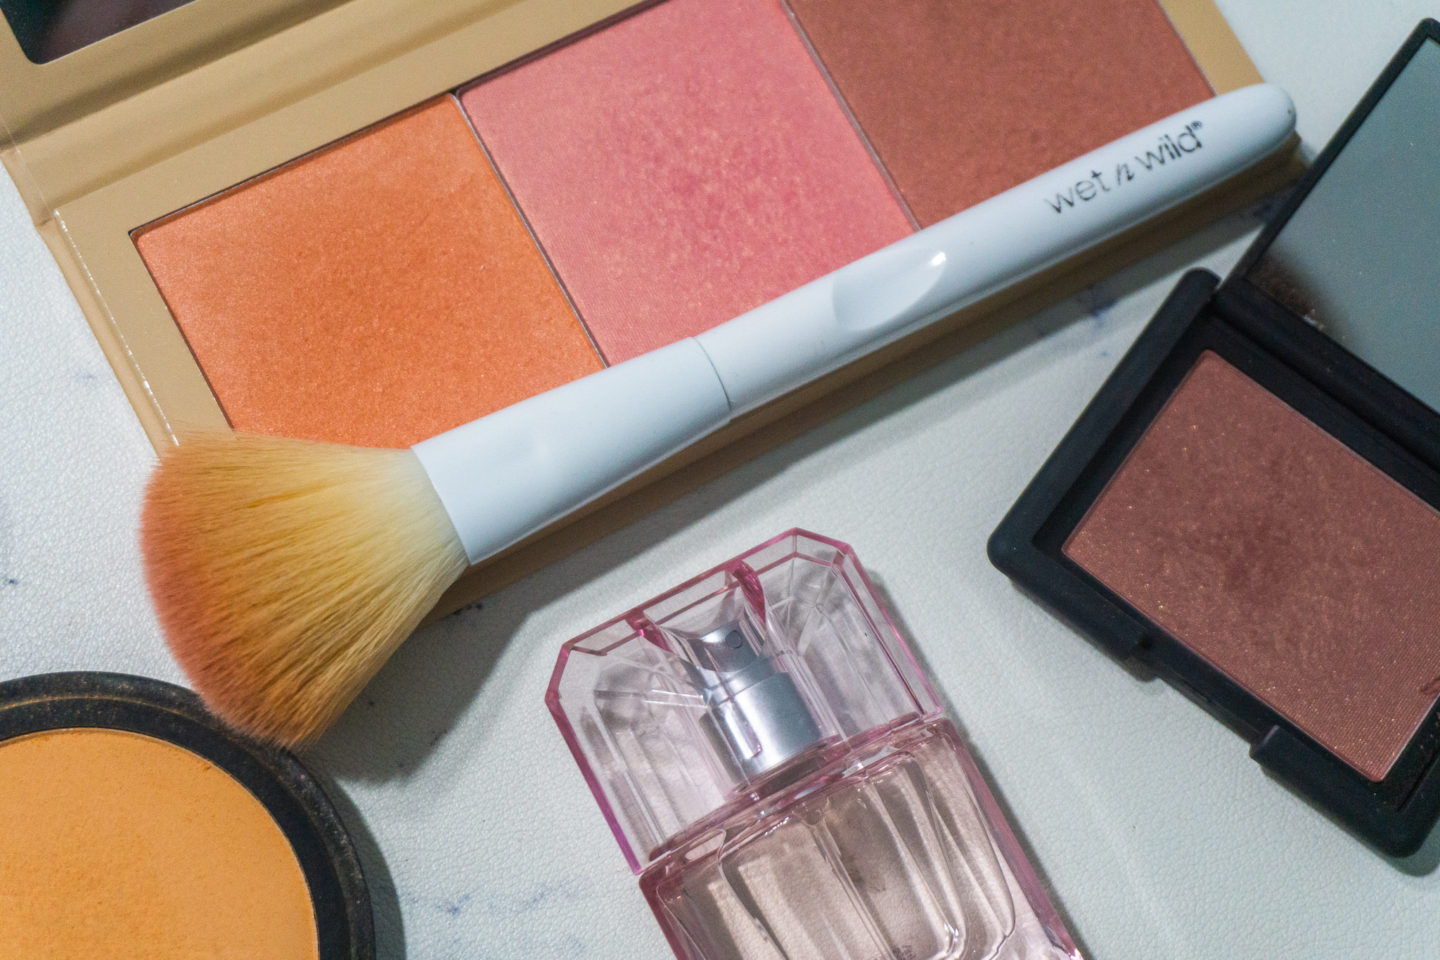 Beauty Pick of the Month: Wet n’ Wild Blush Brush